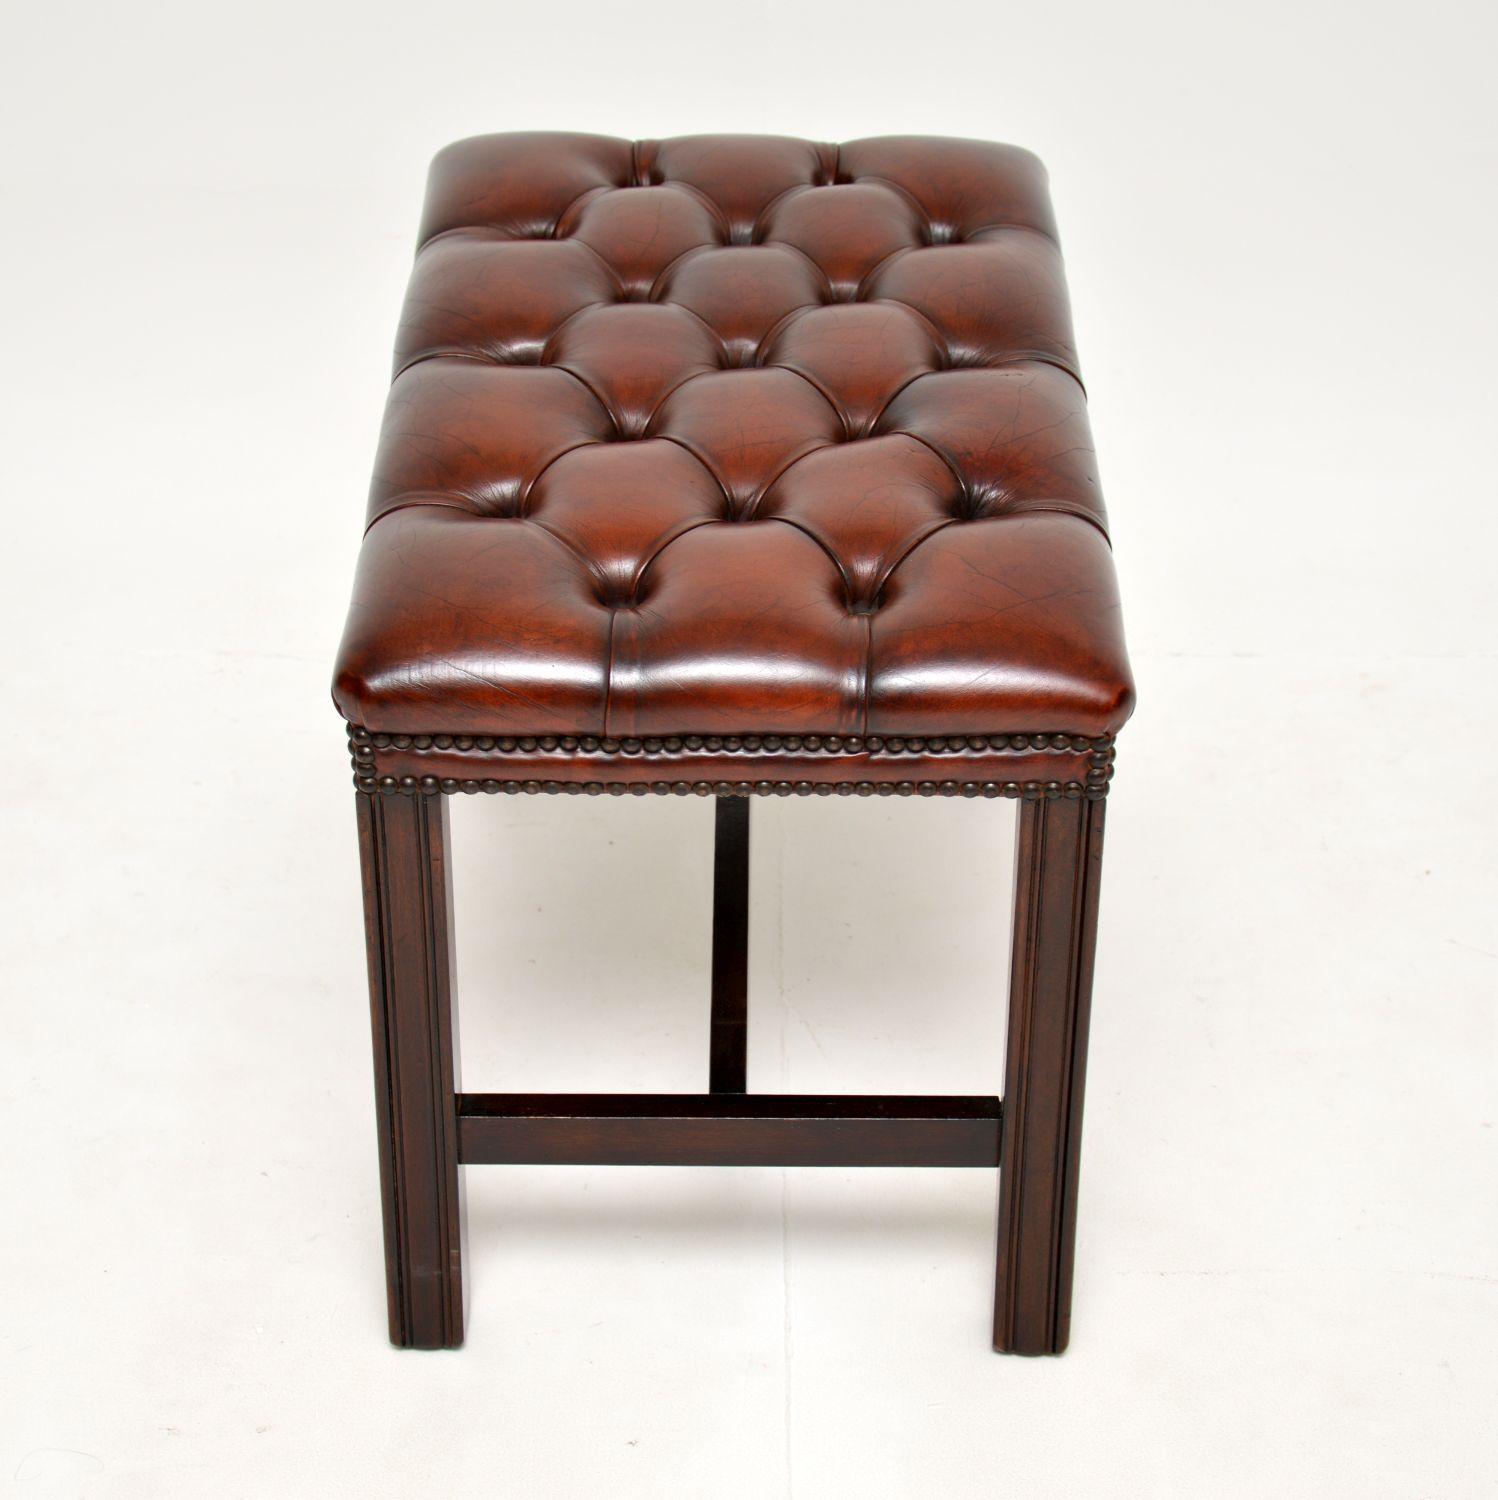 20th Century Antique Leather Foot Stool